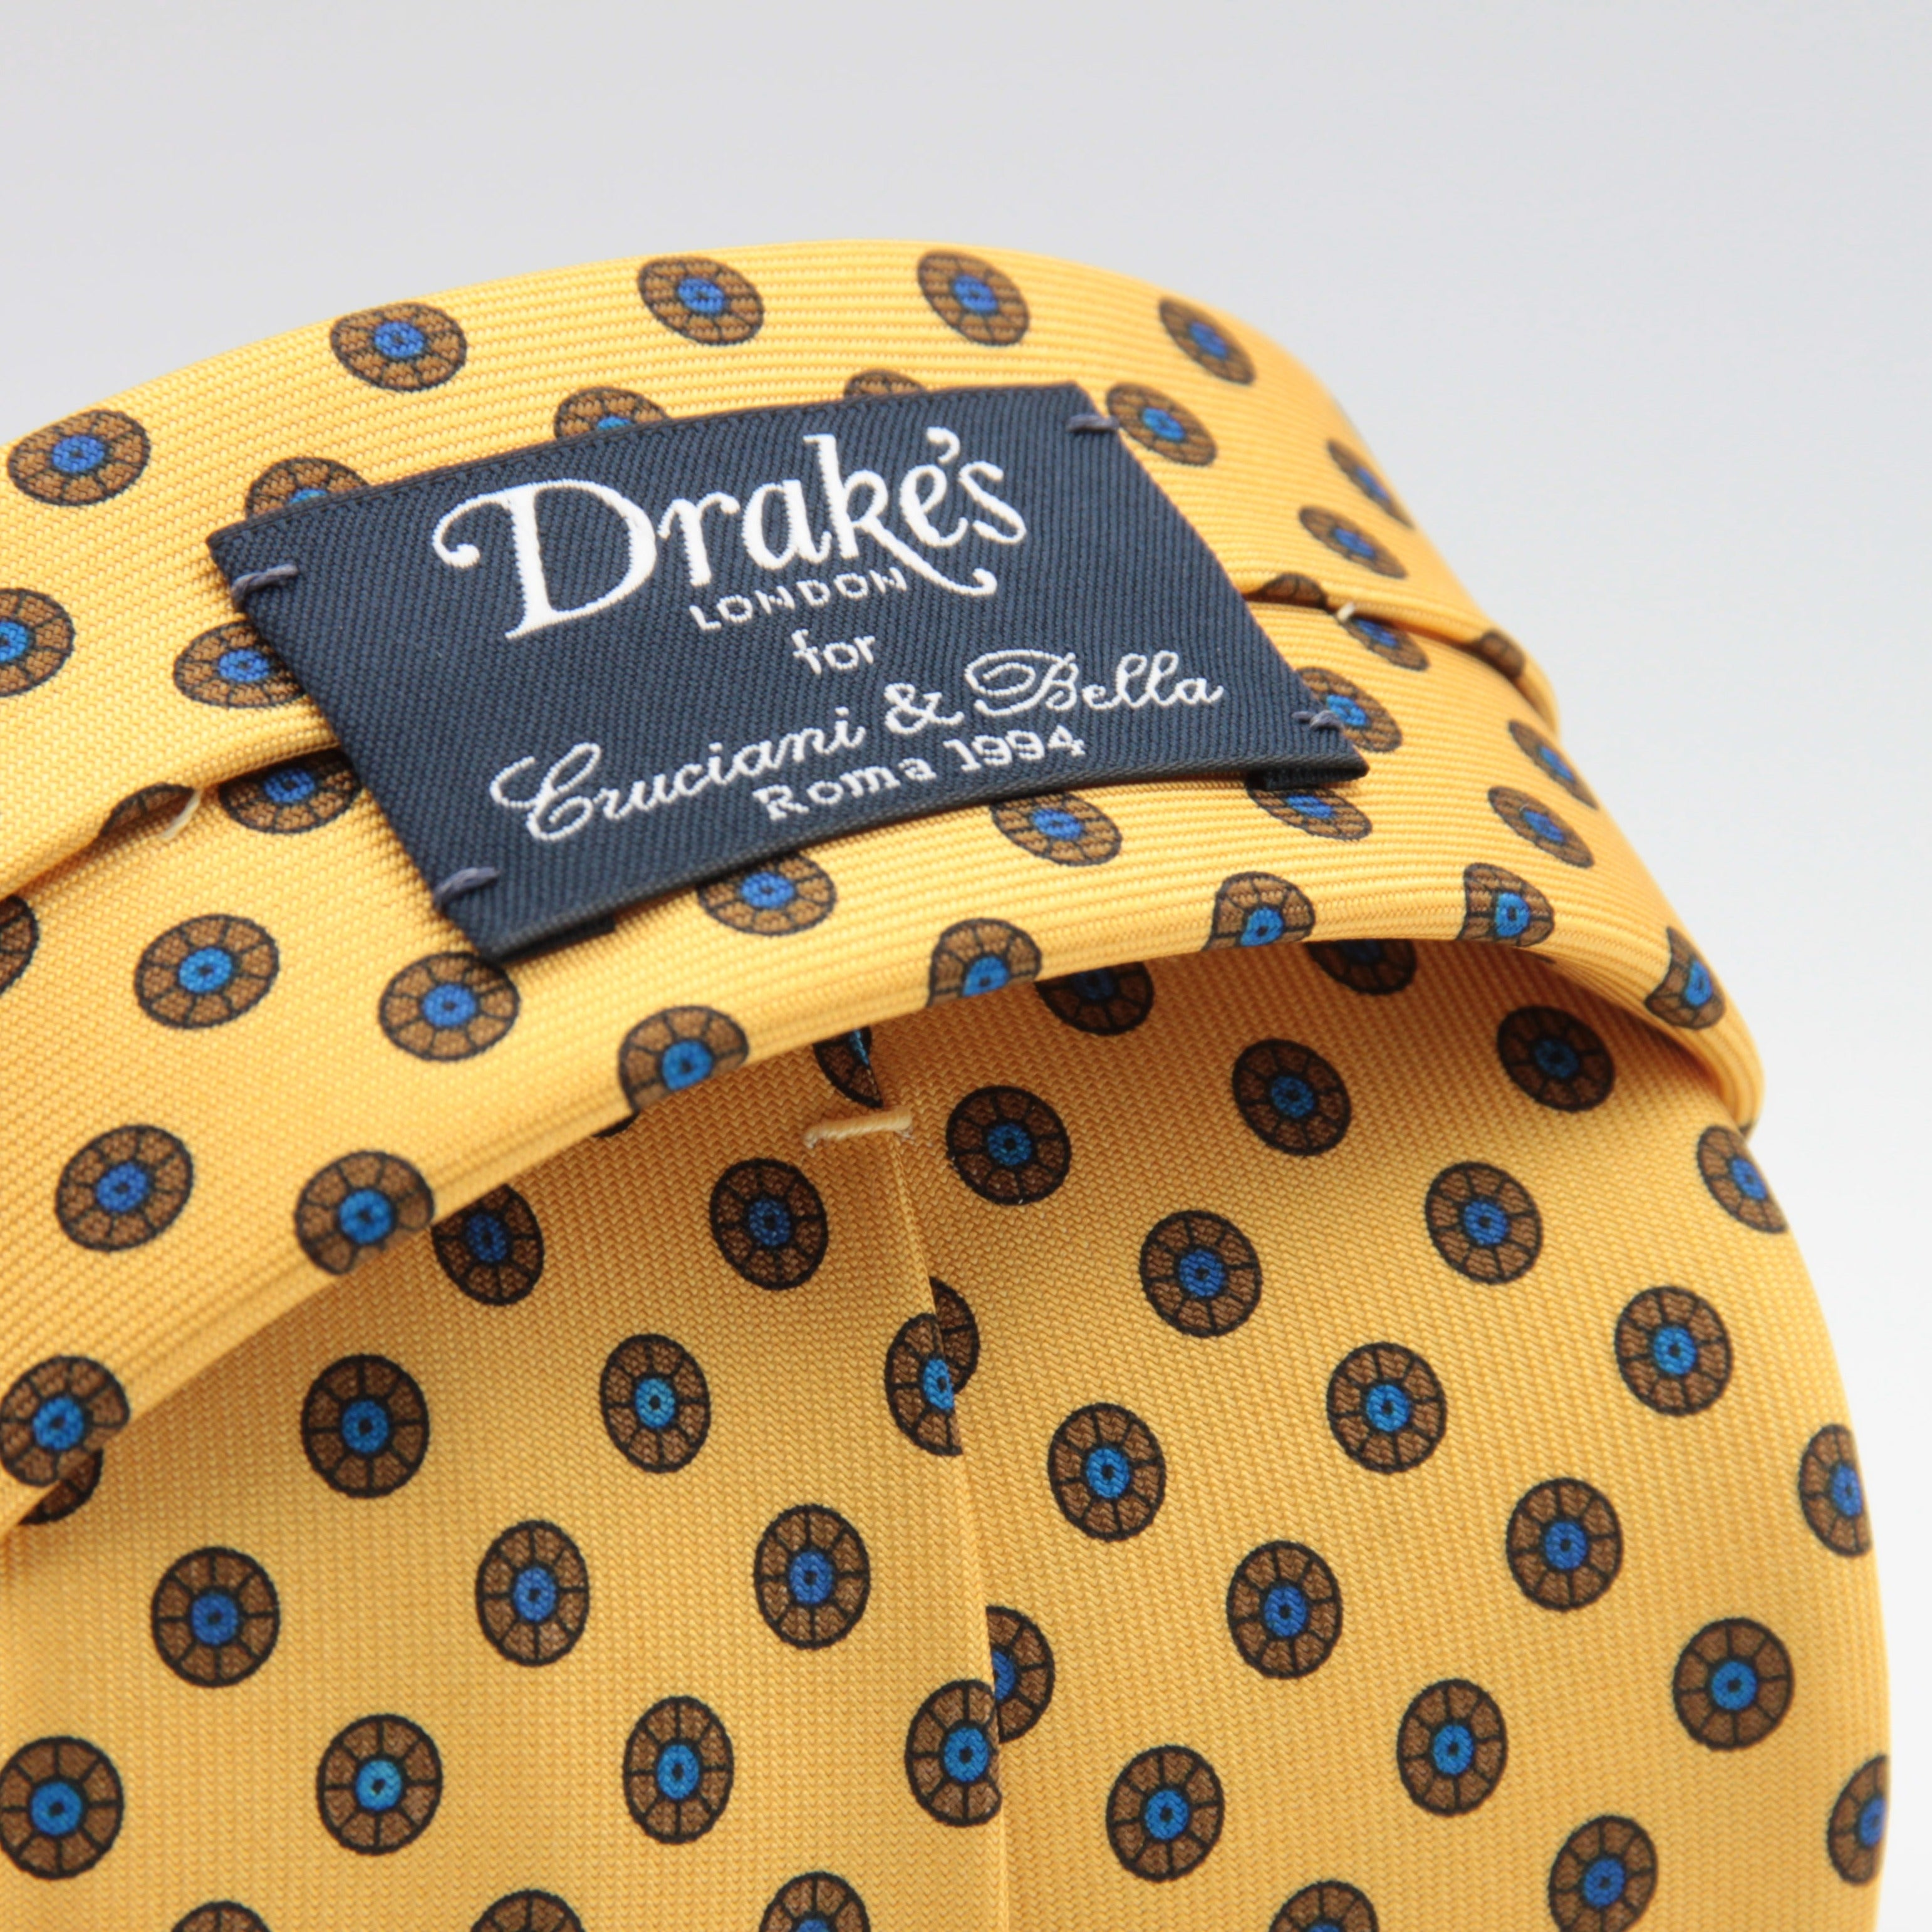 Drake's for Cruciani & Bella 36 oz Self-Tipped 100% Printed Silk Yellow, Brown and Blue Motif Tie Handmade in London. England 9 cm x 150 cm #6359